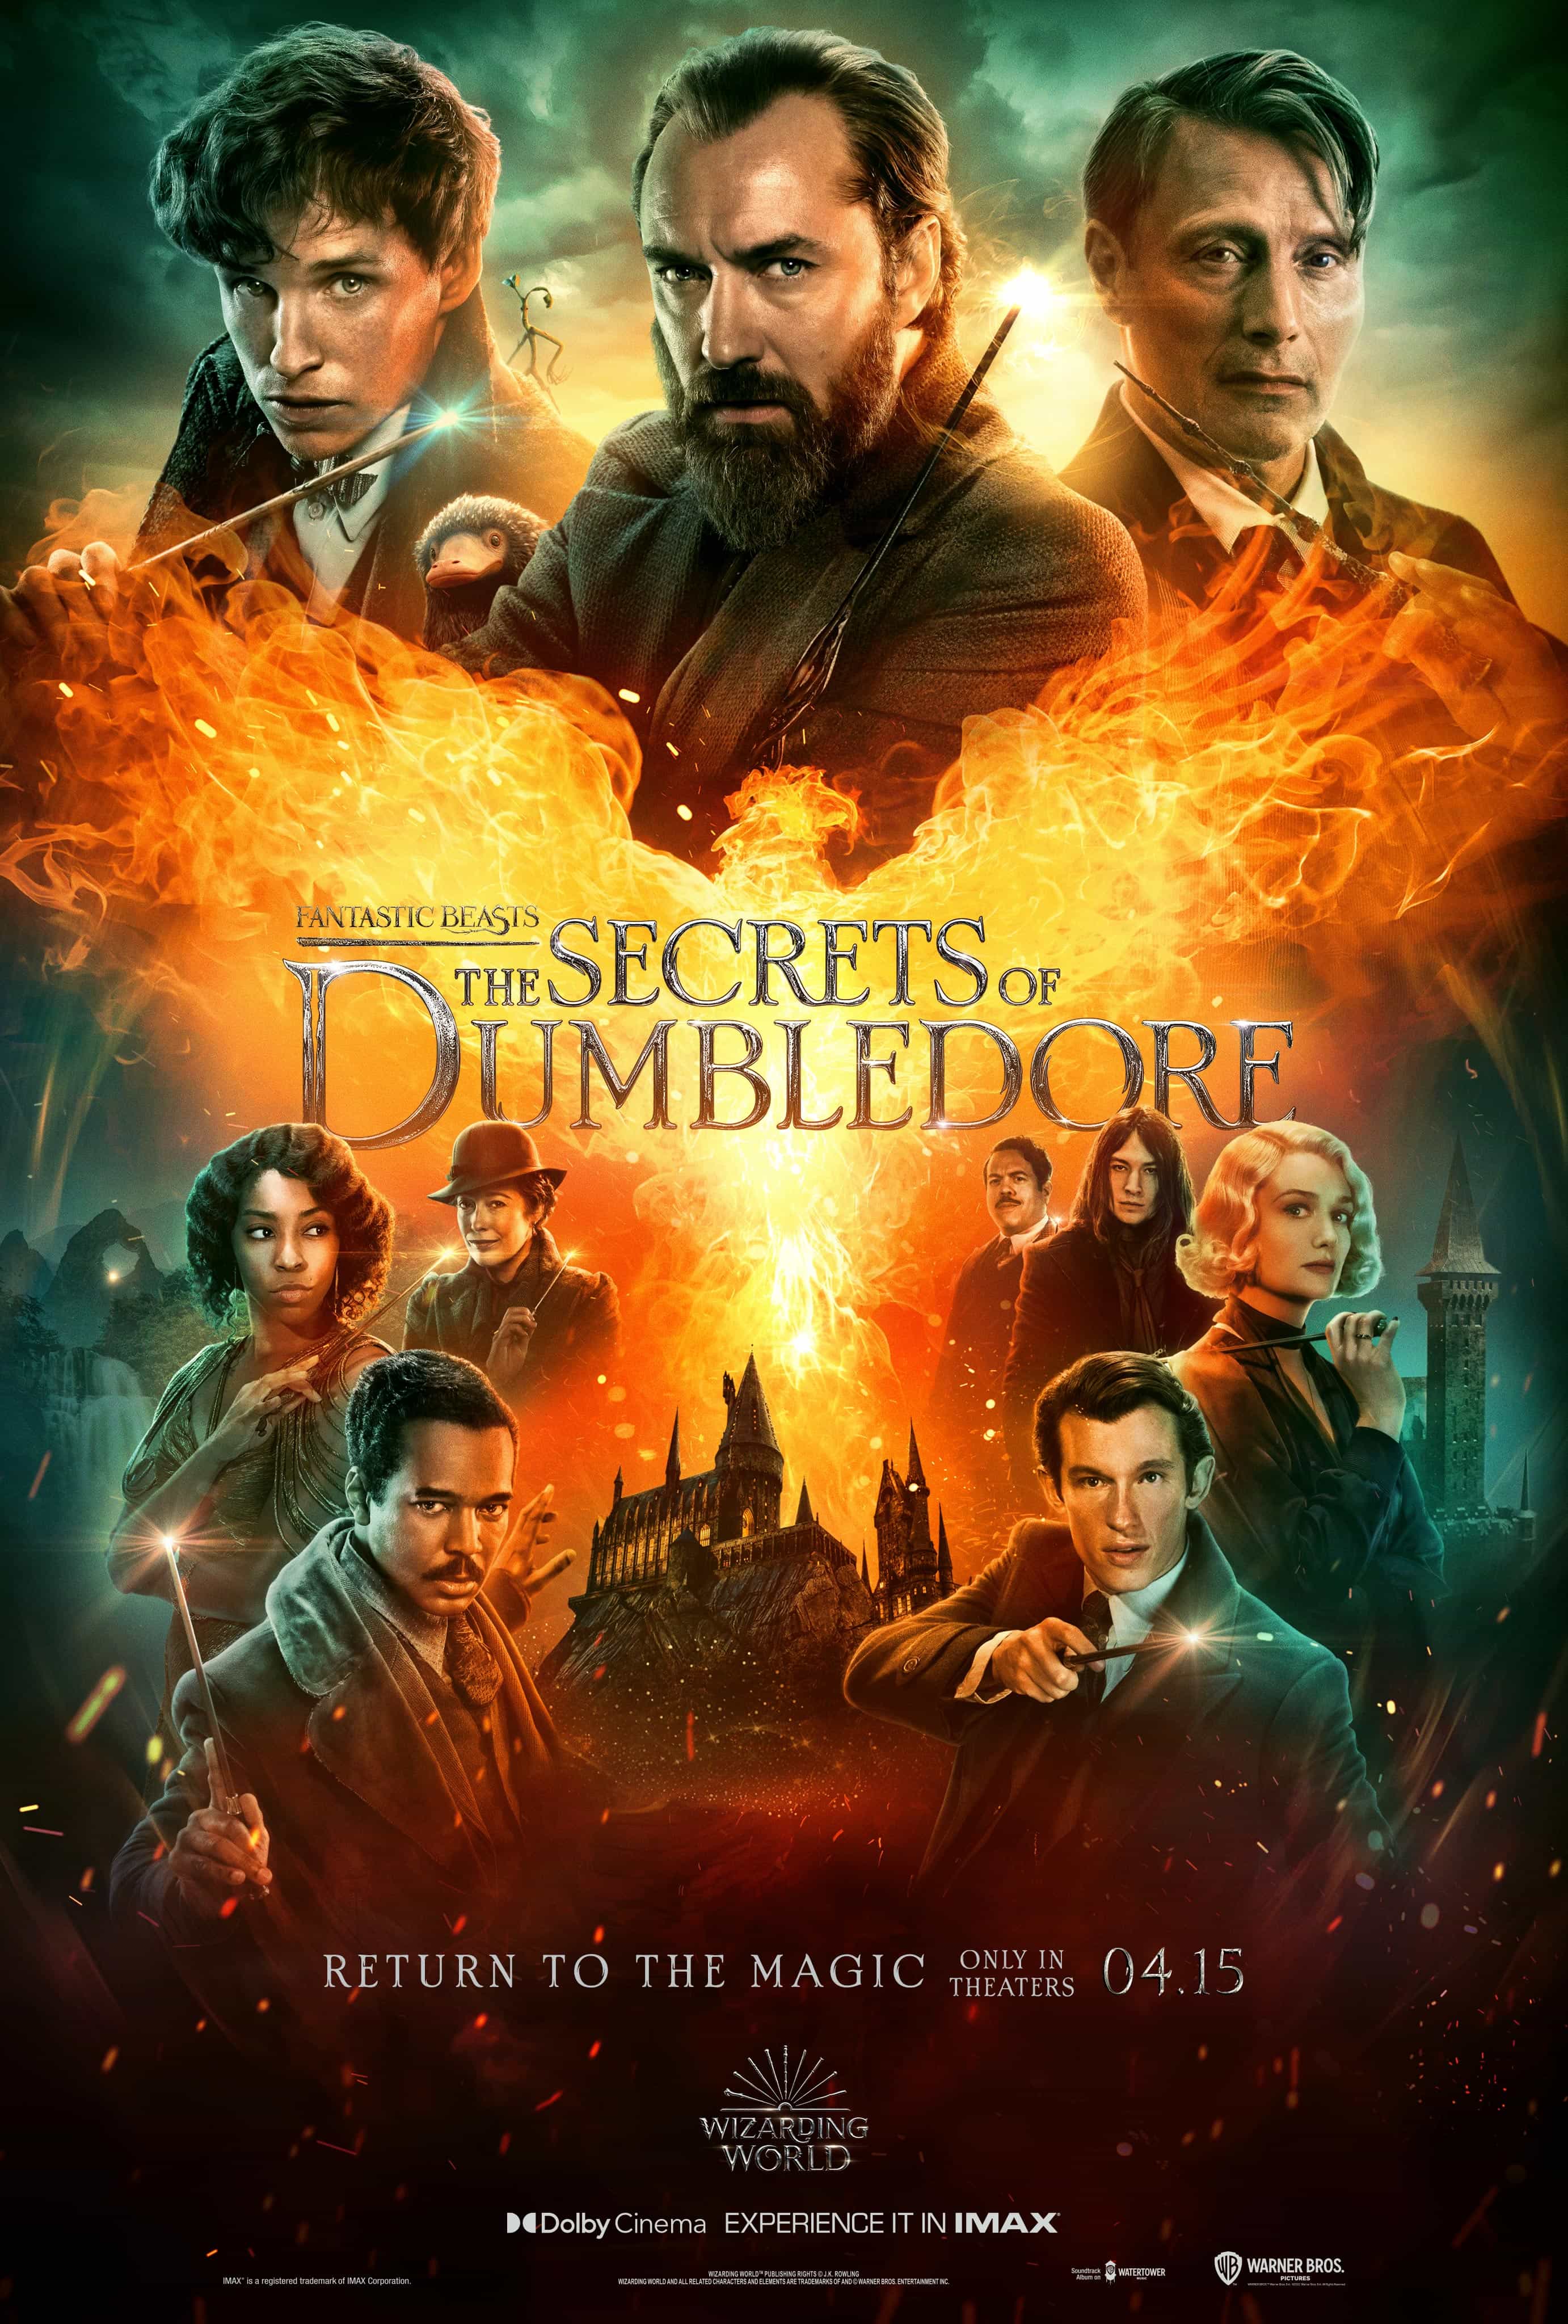 World Box Office Weekend Report 15th - 18th April 2022: Fantastic Beasts 3 climbs to the top of the global box office with a weekend gross of $114 Million, K.G.F: Chapter 2 is the top new mov